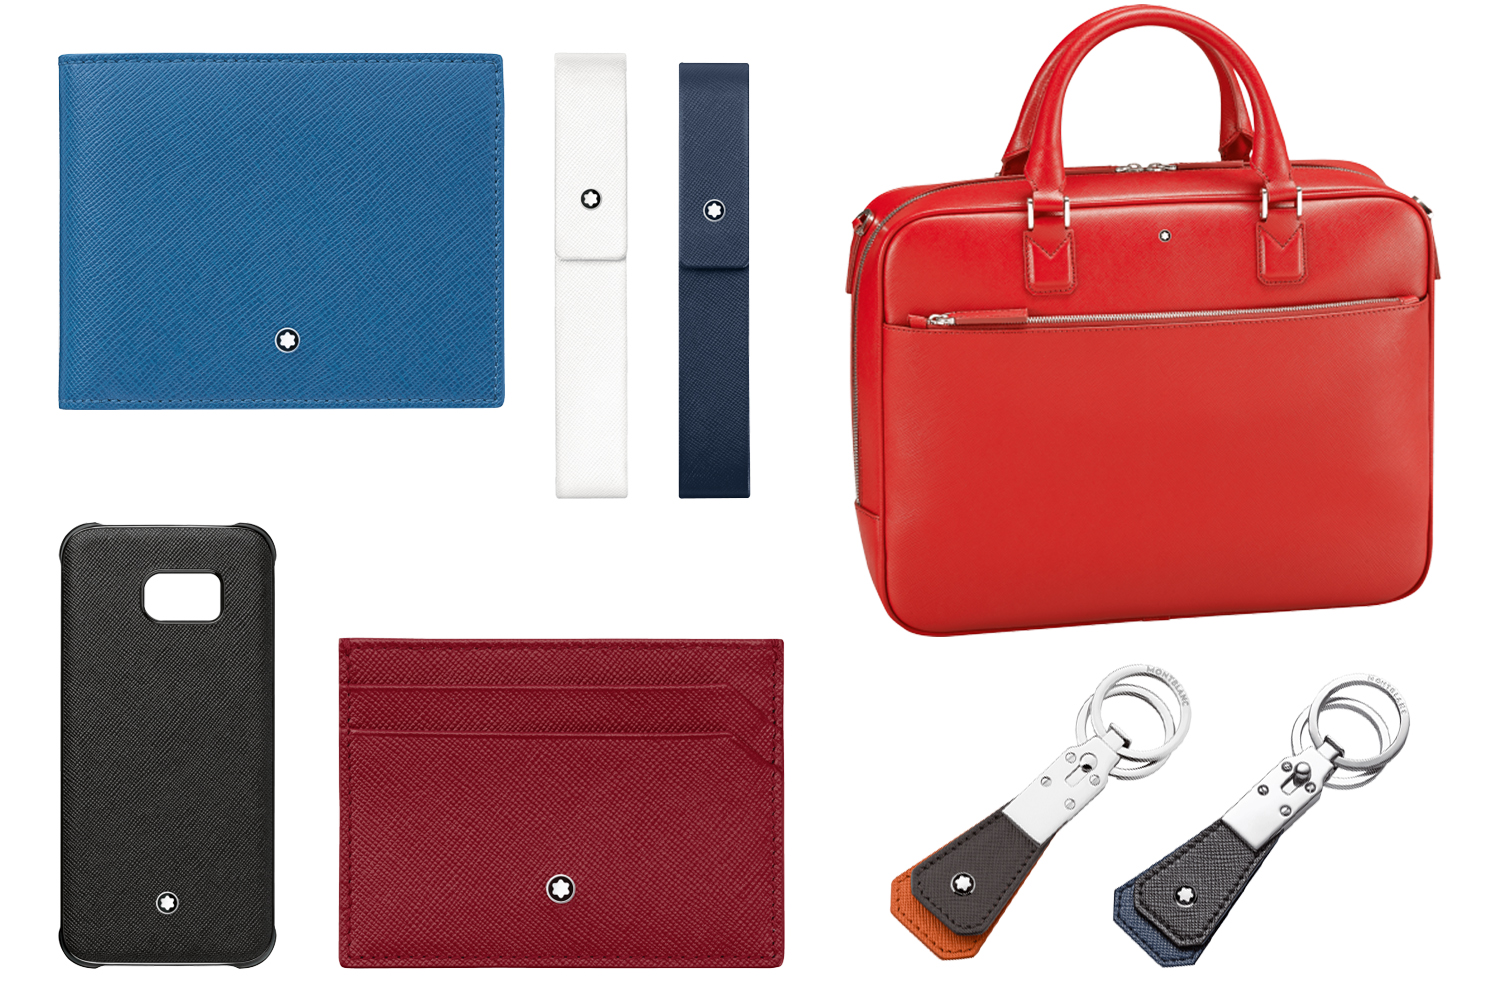 Montblanc Sartorial collection features new colours and functionalities ...